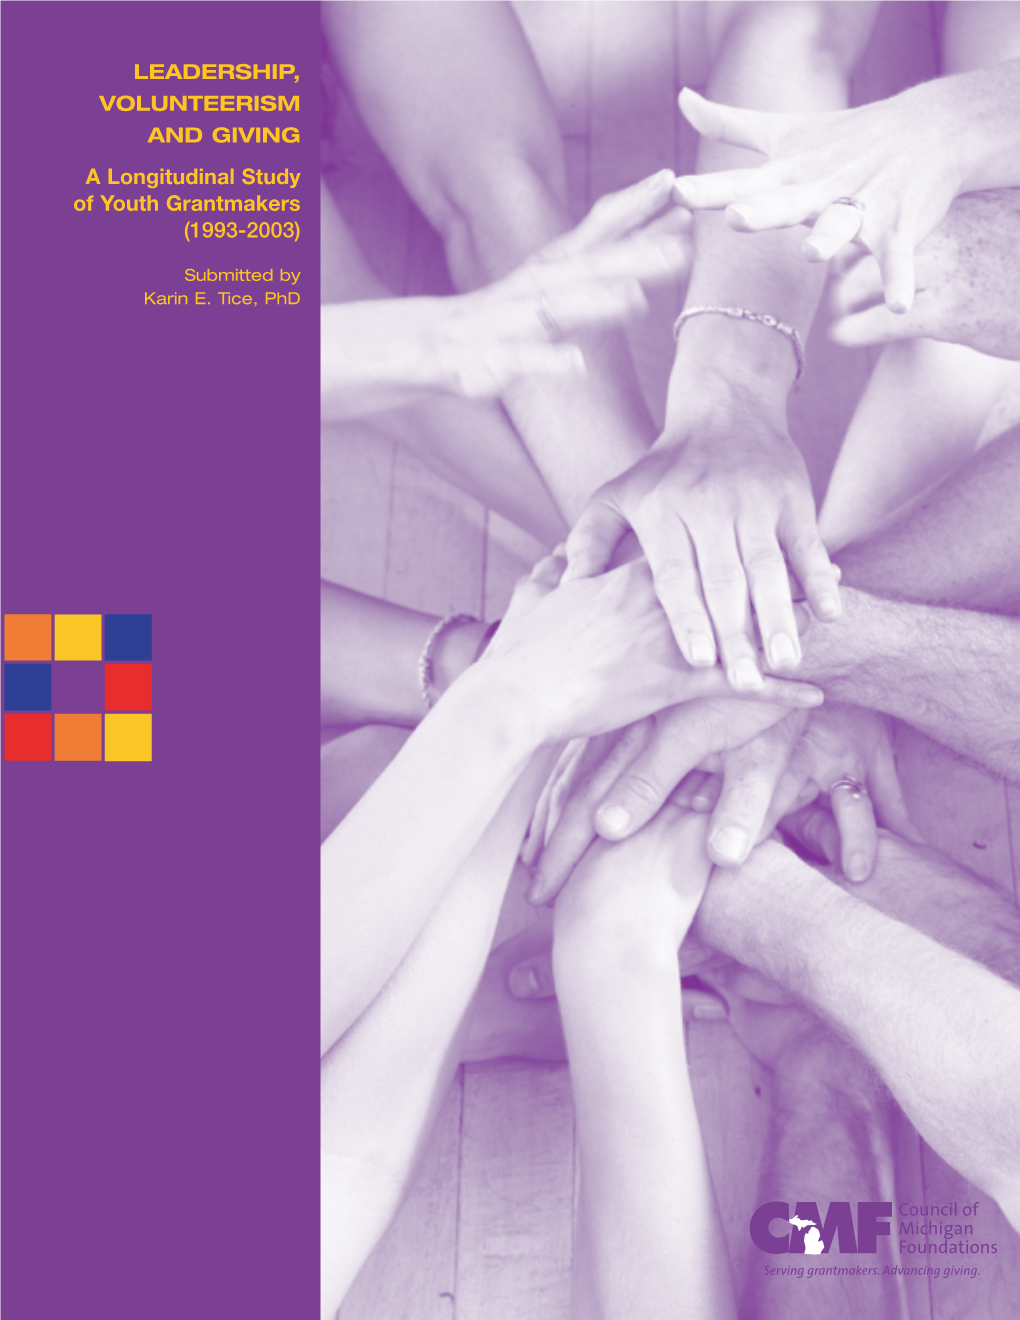 A Longitudinal Study of Youth Grantmakers (1993-2003)